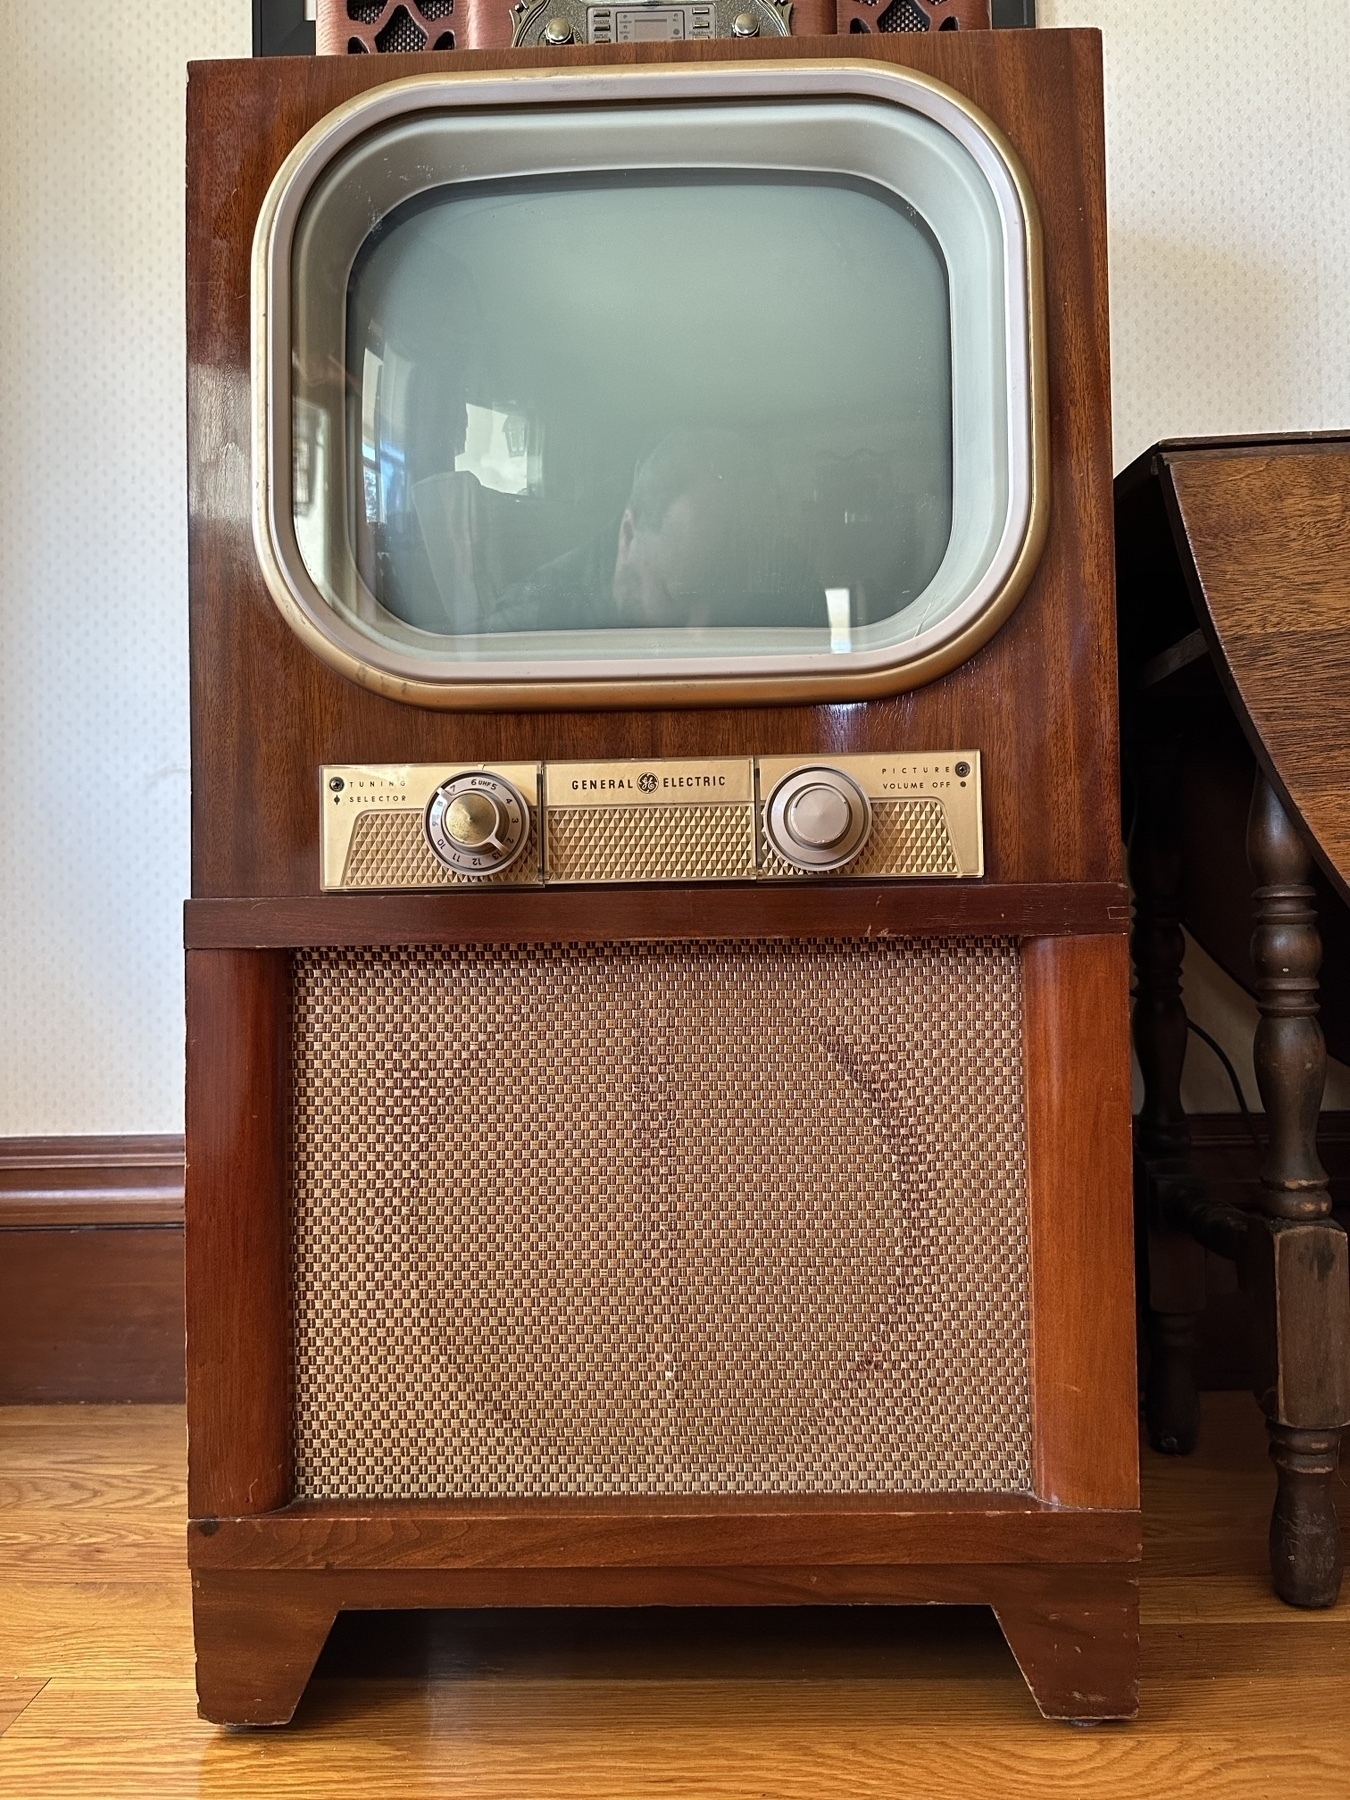 1951 GE Television in a wood console